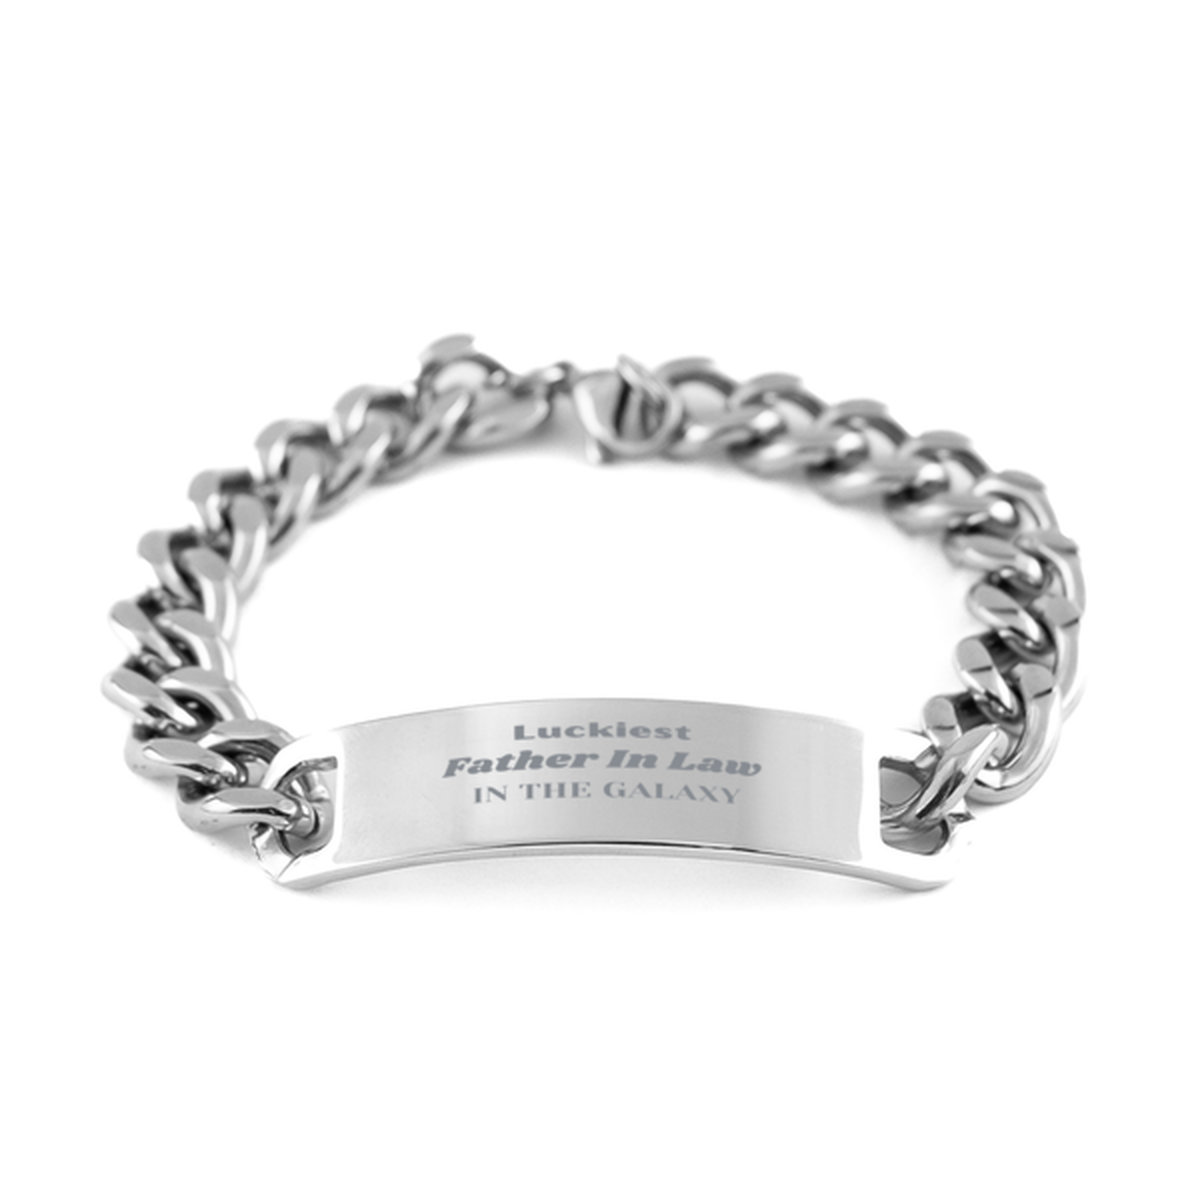 Luckiest Father In Law in the Galaxy, To My Father In Law Engraved Gifts, Christmas Father In Law Cuban Chain Stainless Steel Bracelet Gifts, X-mas Birthday Unique Gifts For Father In Law Men Women